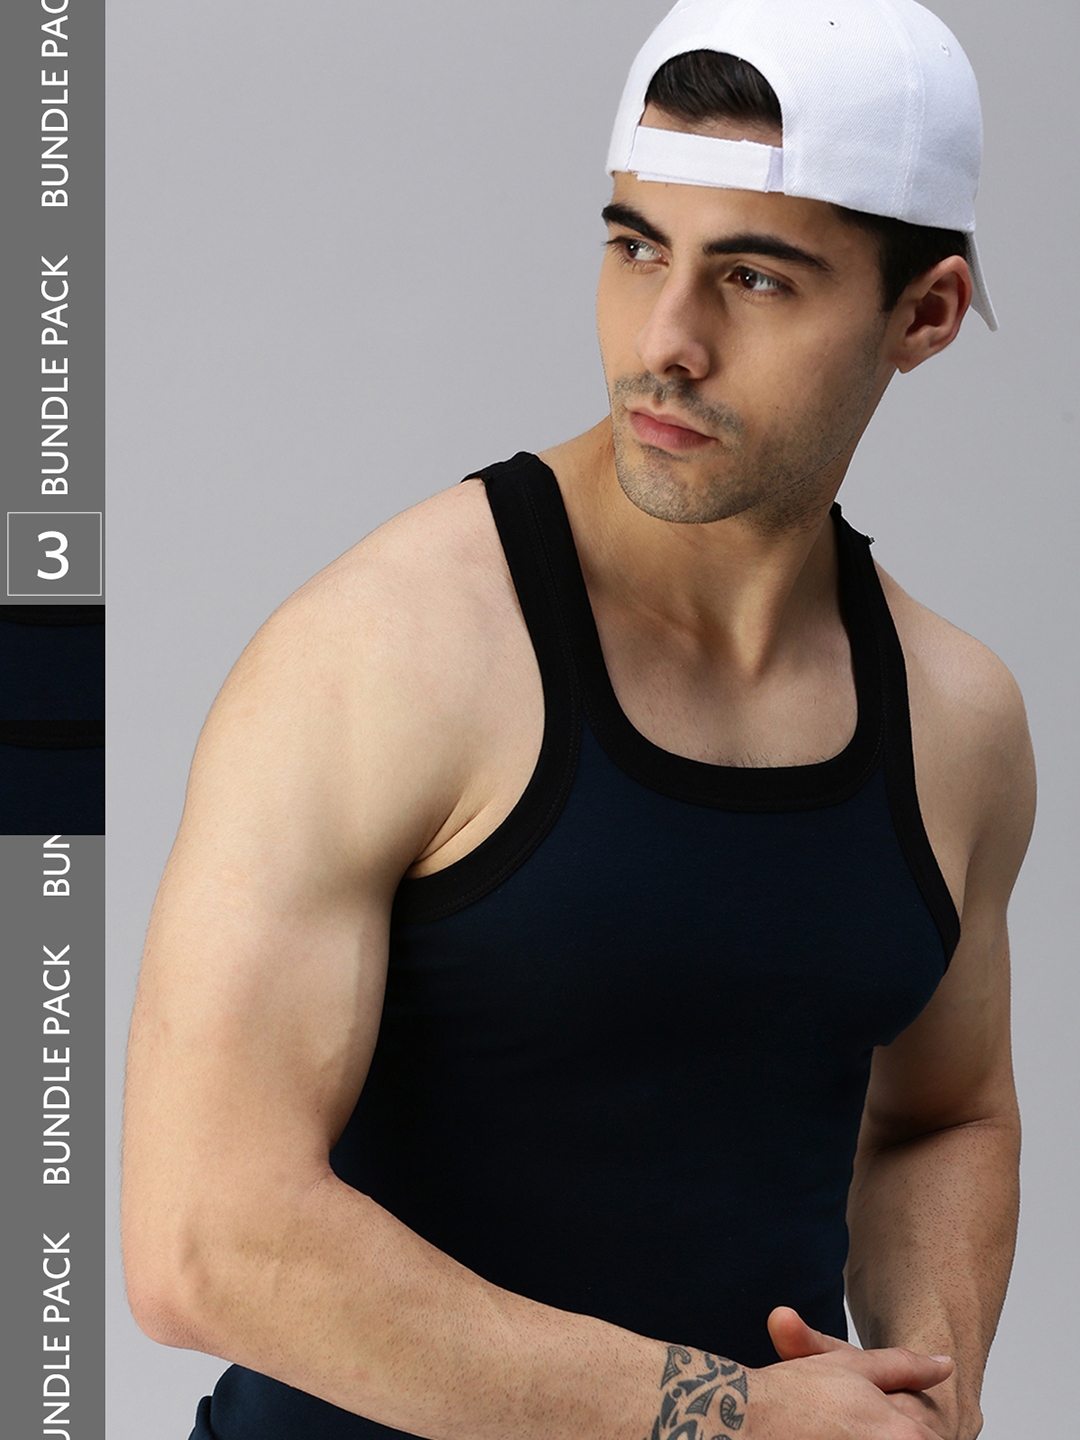 Buy Lux Cozi Men Pack of 3 Assorted Pure Cotton Gym Vest (Size